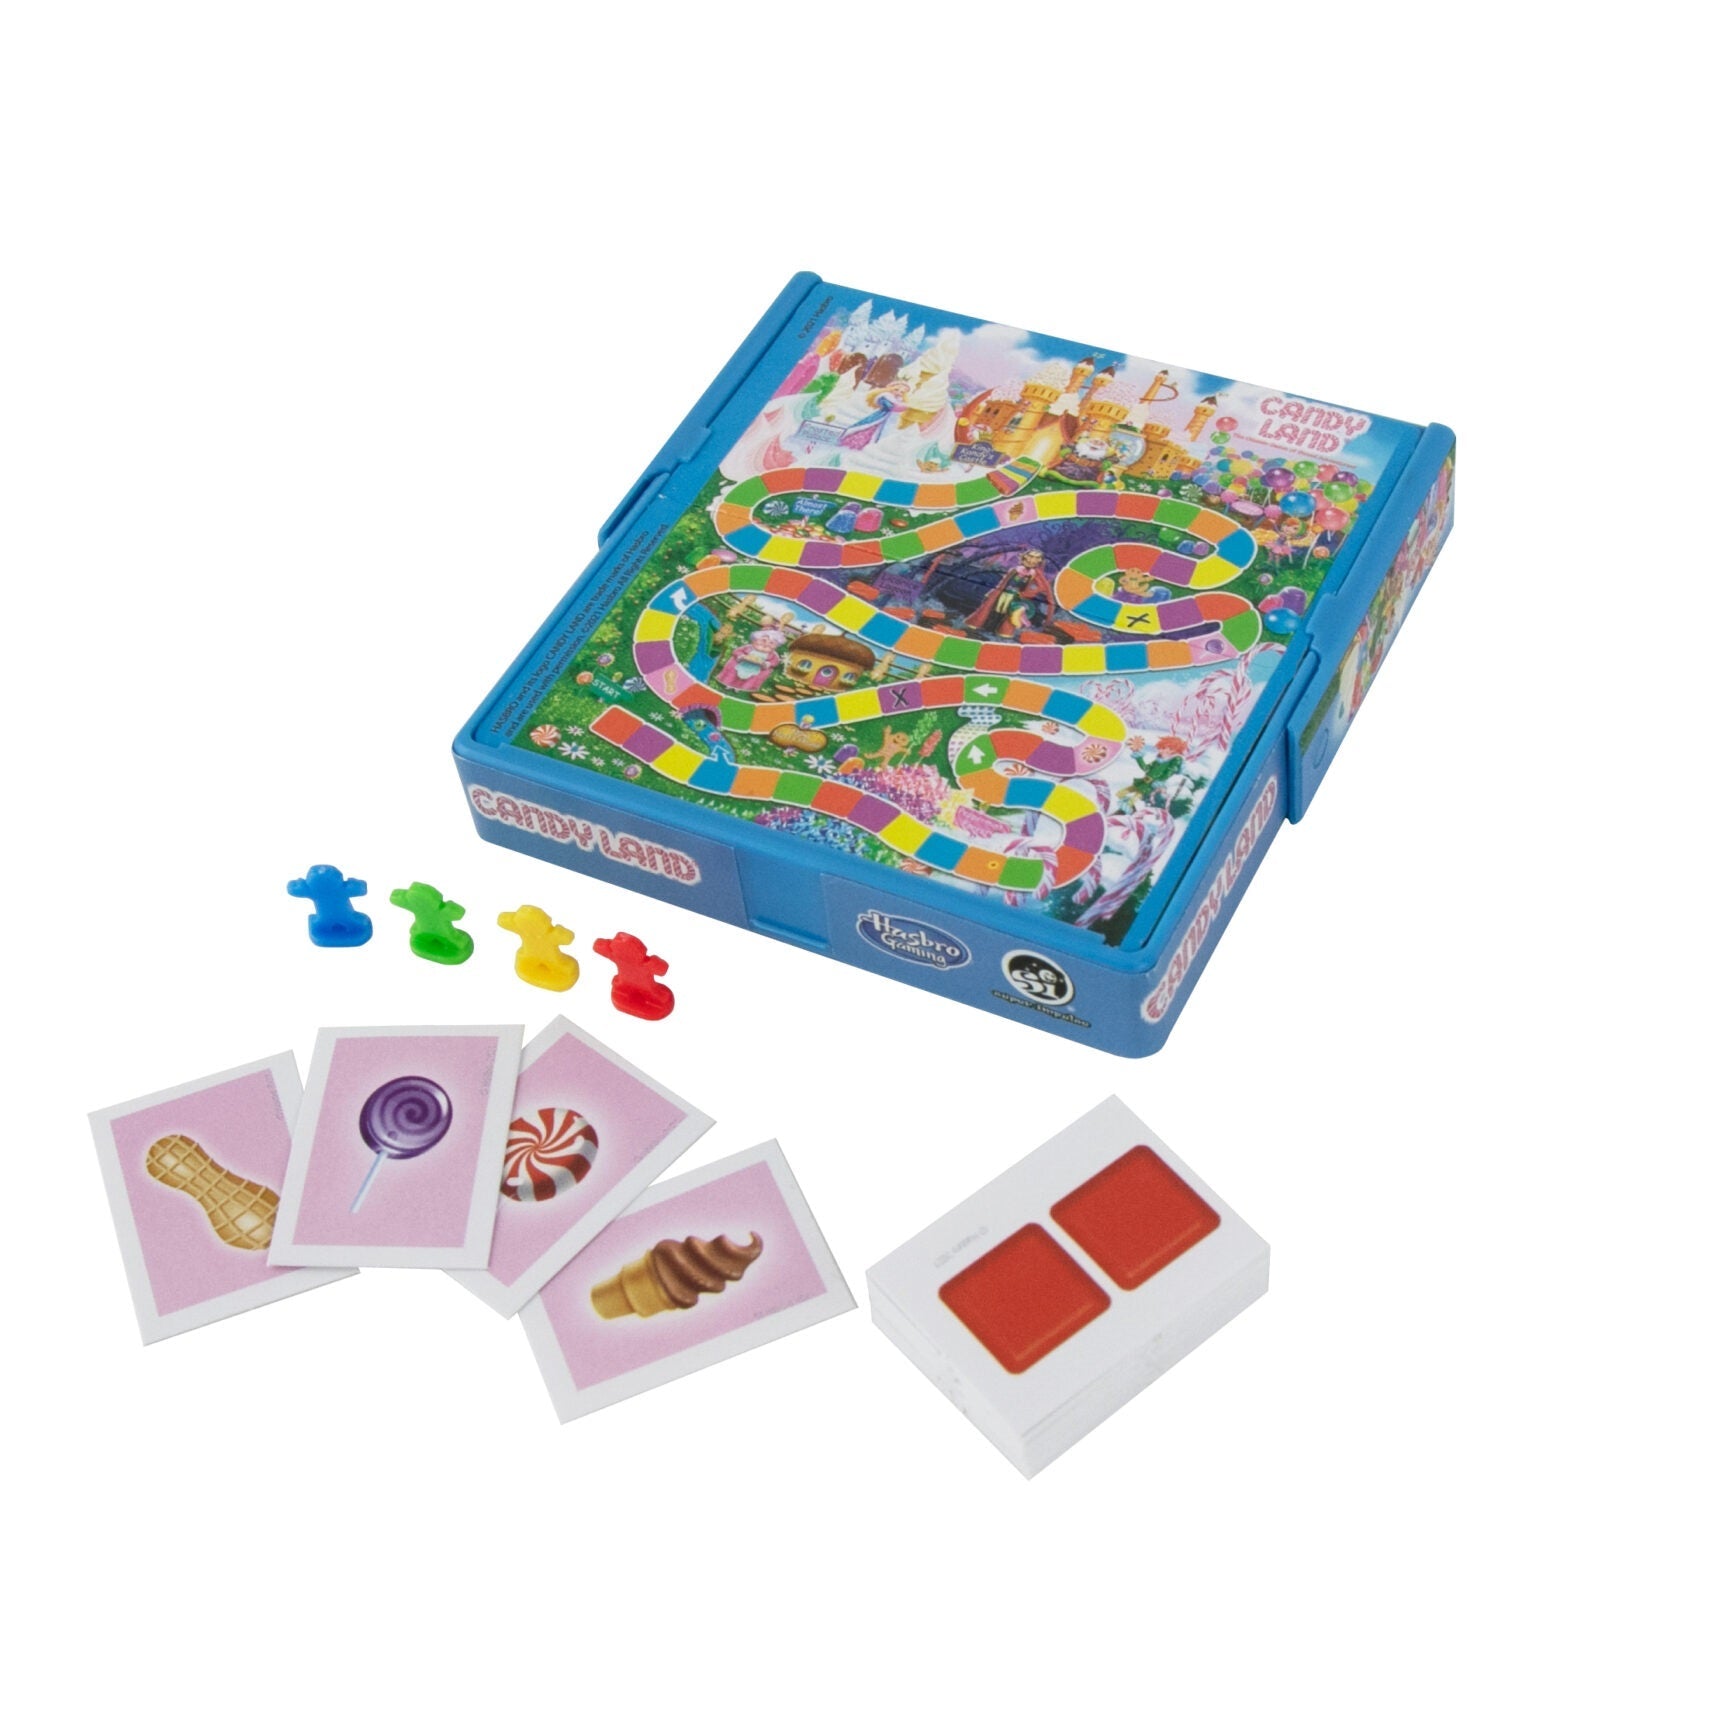 World's Smallest Candyland Board Game